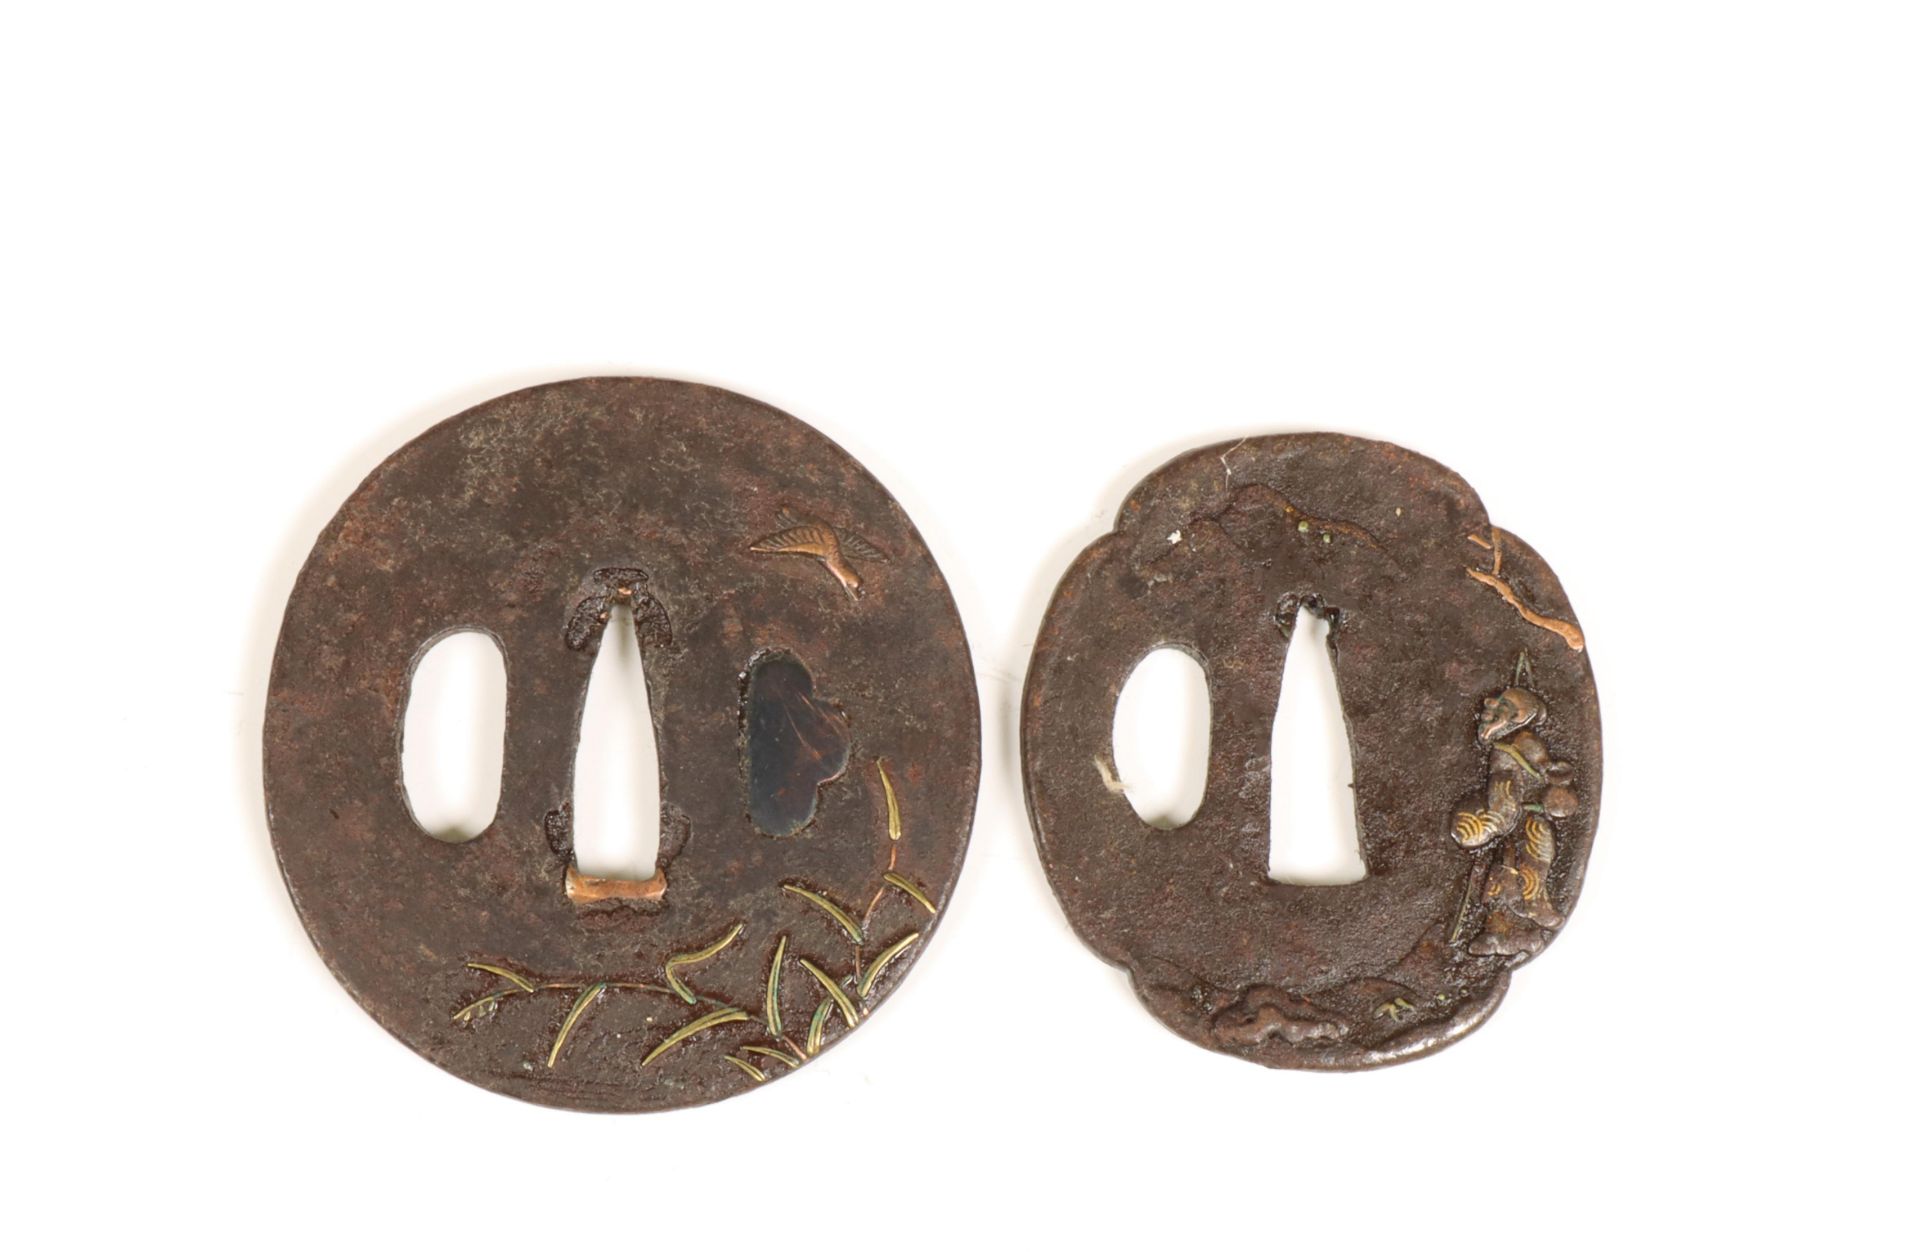 Japan, two iron tsuba's with gold- and silver inlay, Edo period (1615-1868);